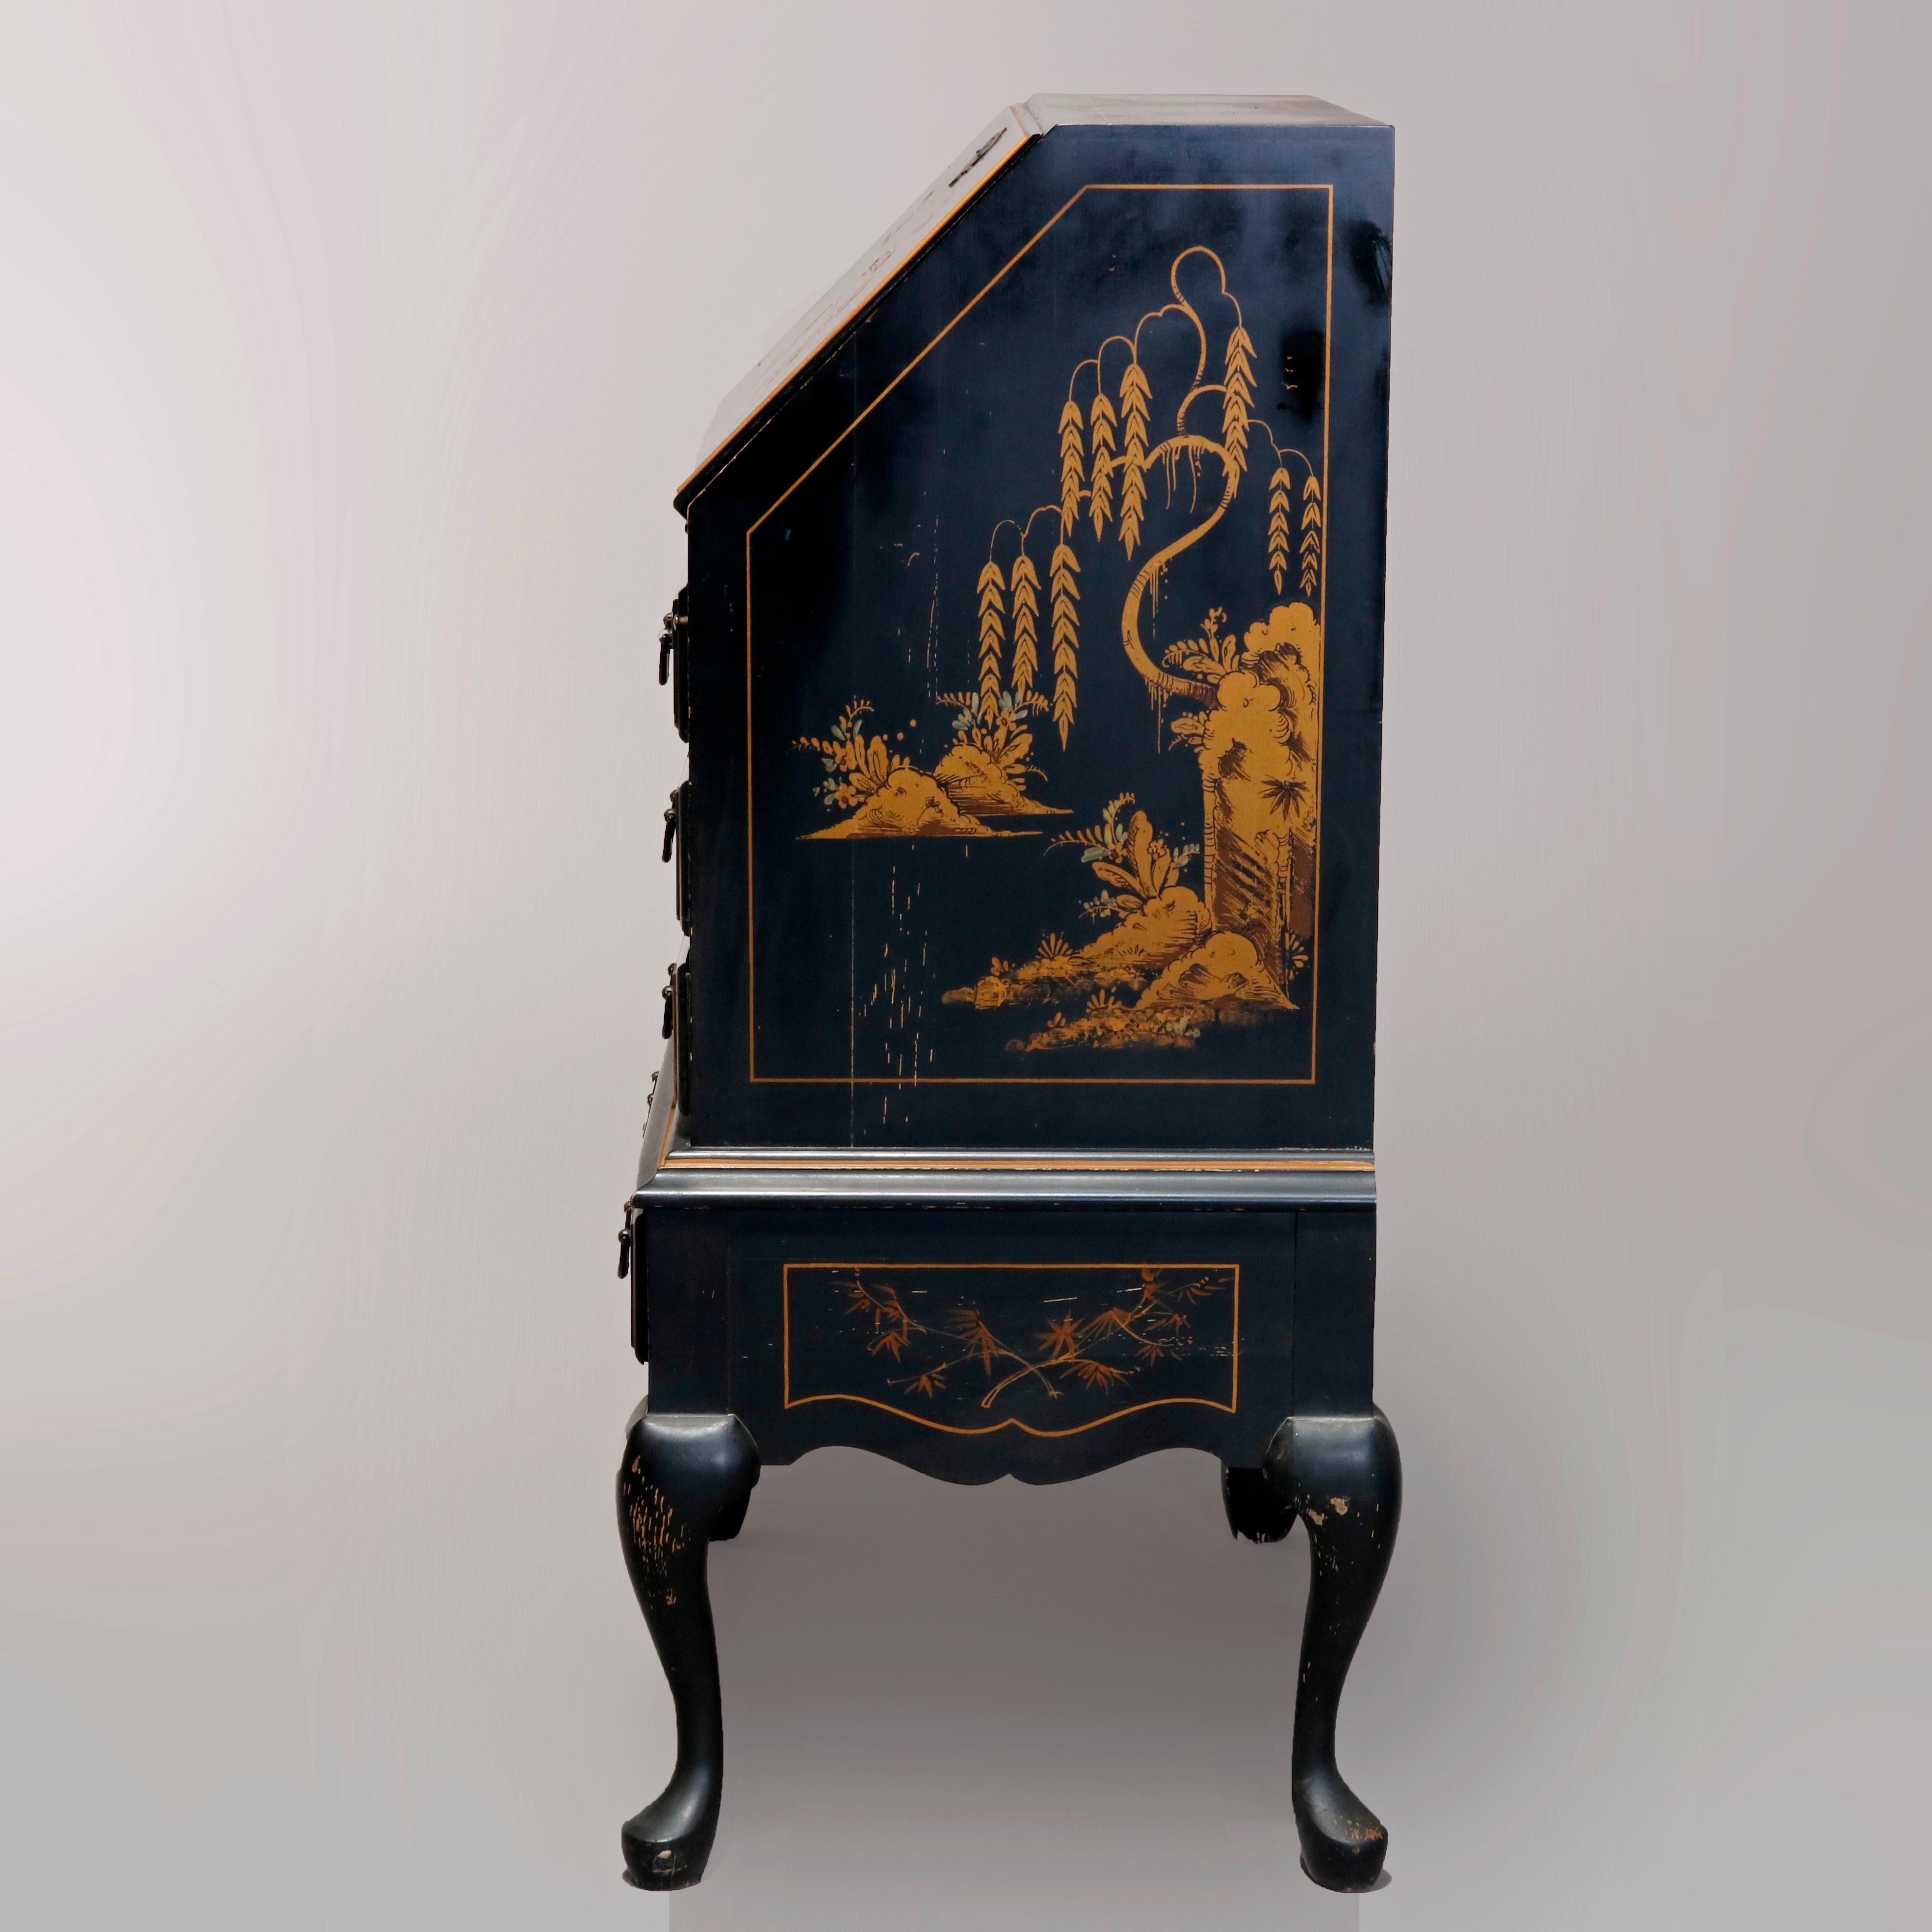 A vintage Chippendale style secretary offers chinoiserie decorated ebonized finish with landscape and garden scenes having pagodas and birds including herons, slant front drops down to reveal desk with pigeon holes and surmounts case with long